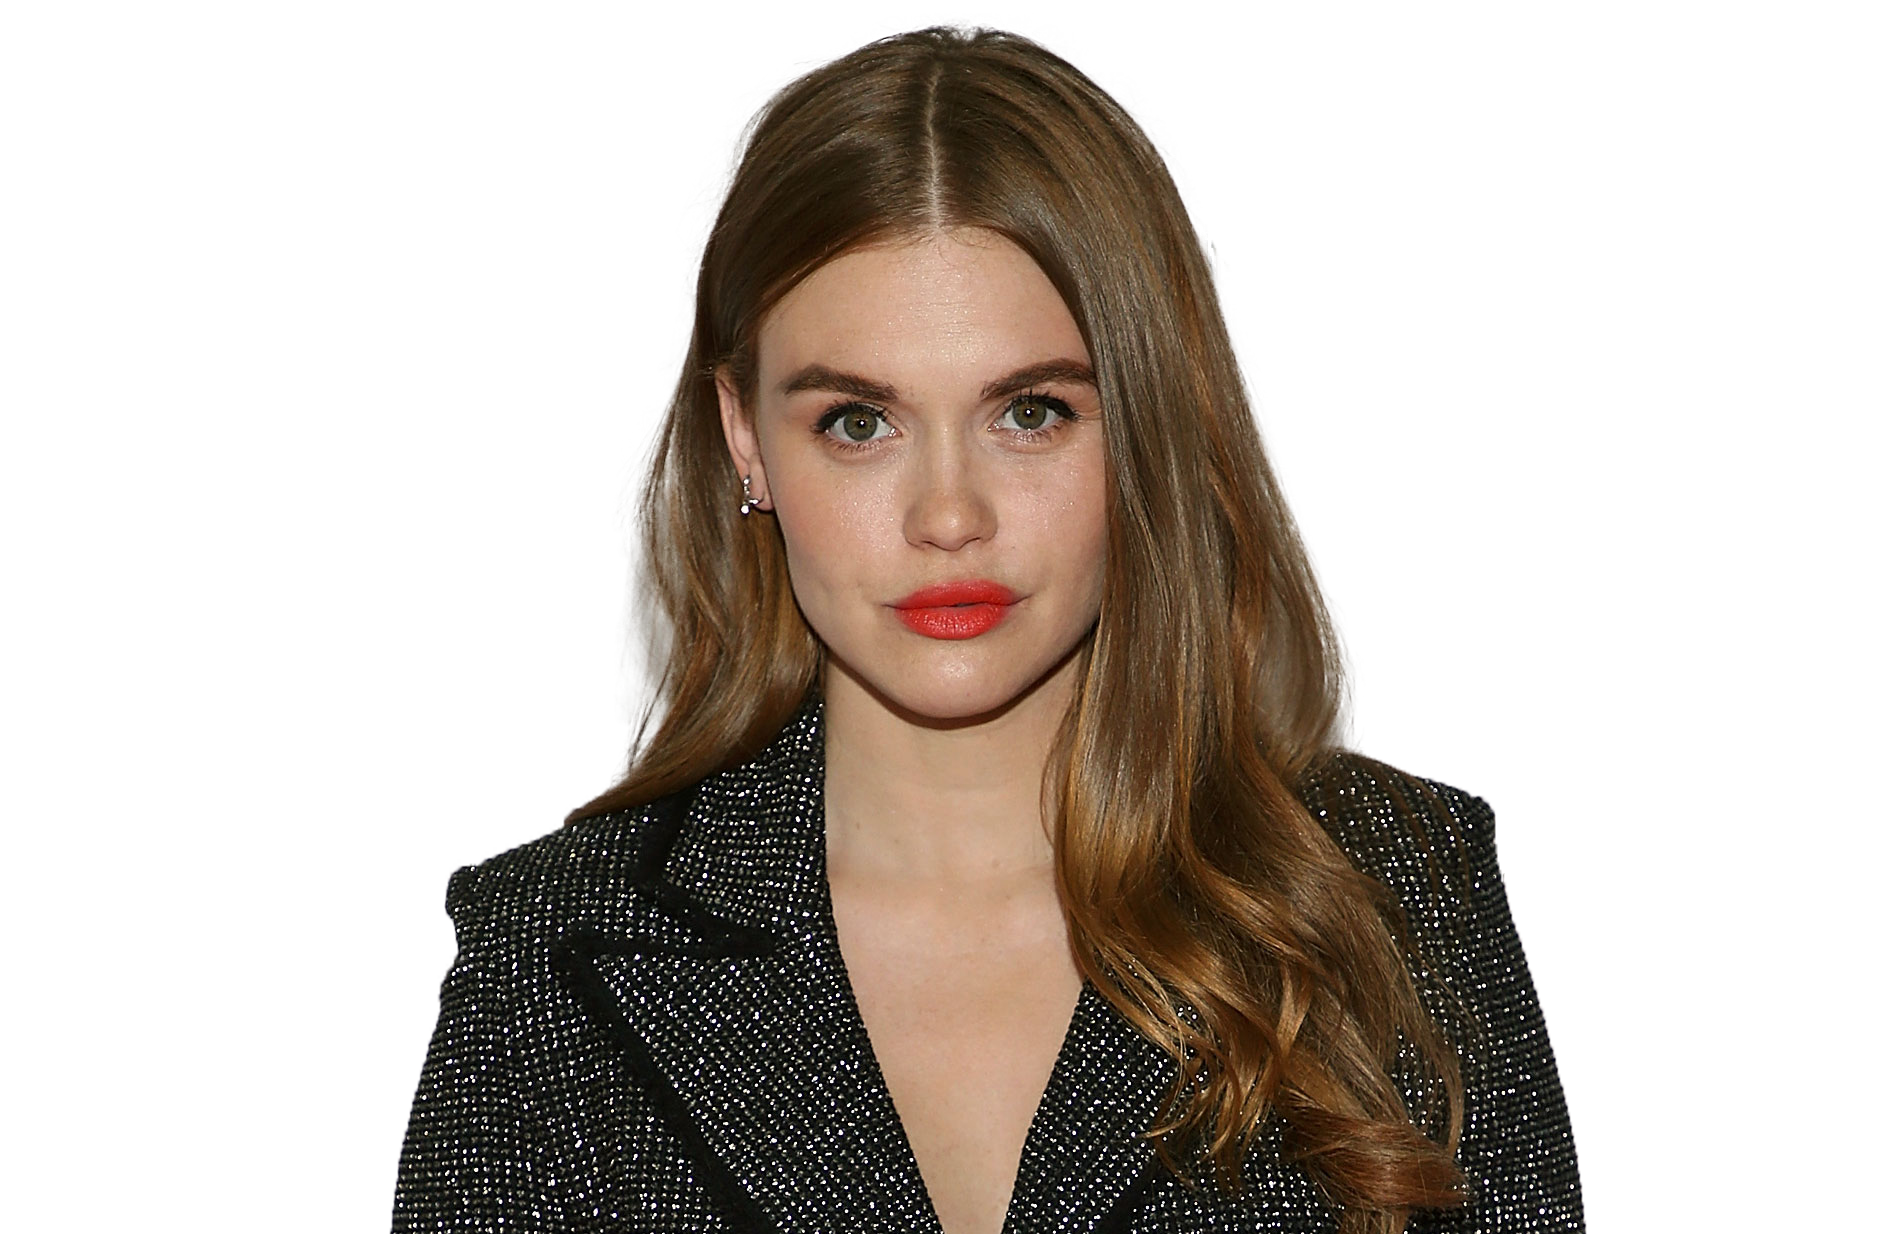 4. Holland Roden's Blonde Hair: How to Get the Look - wide 9